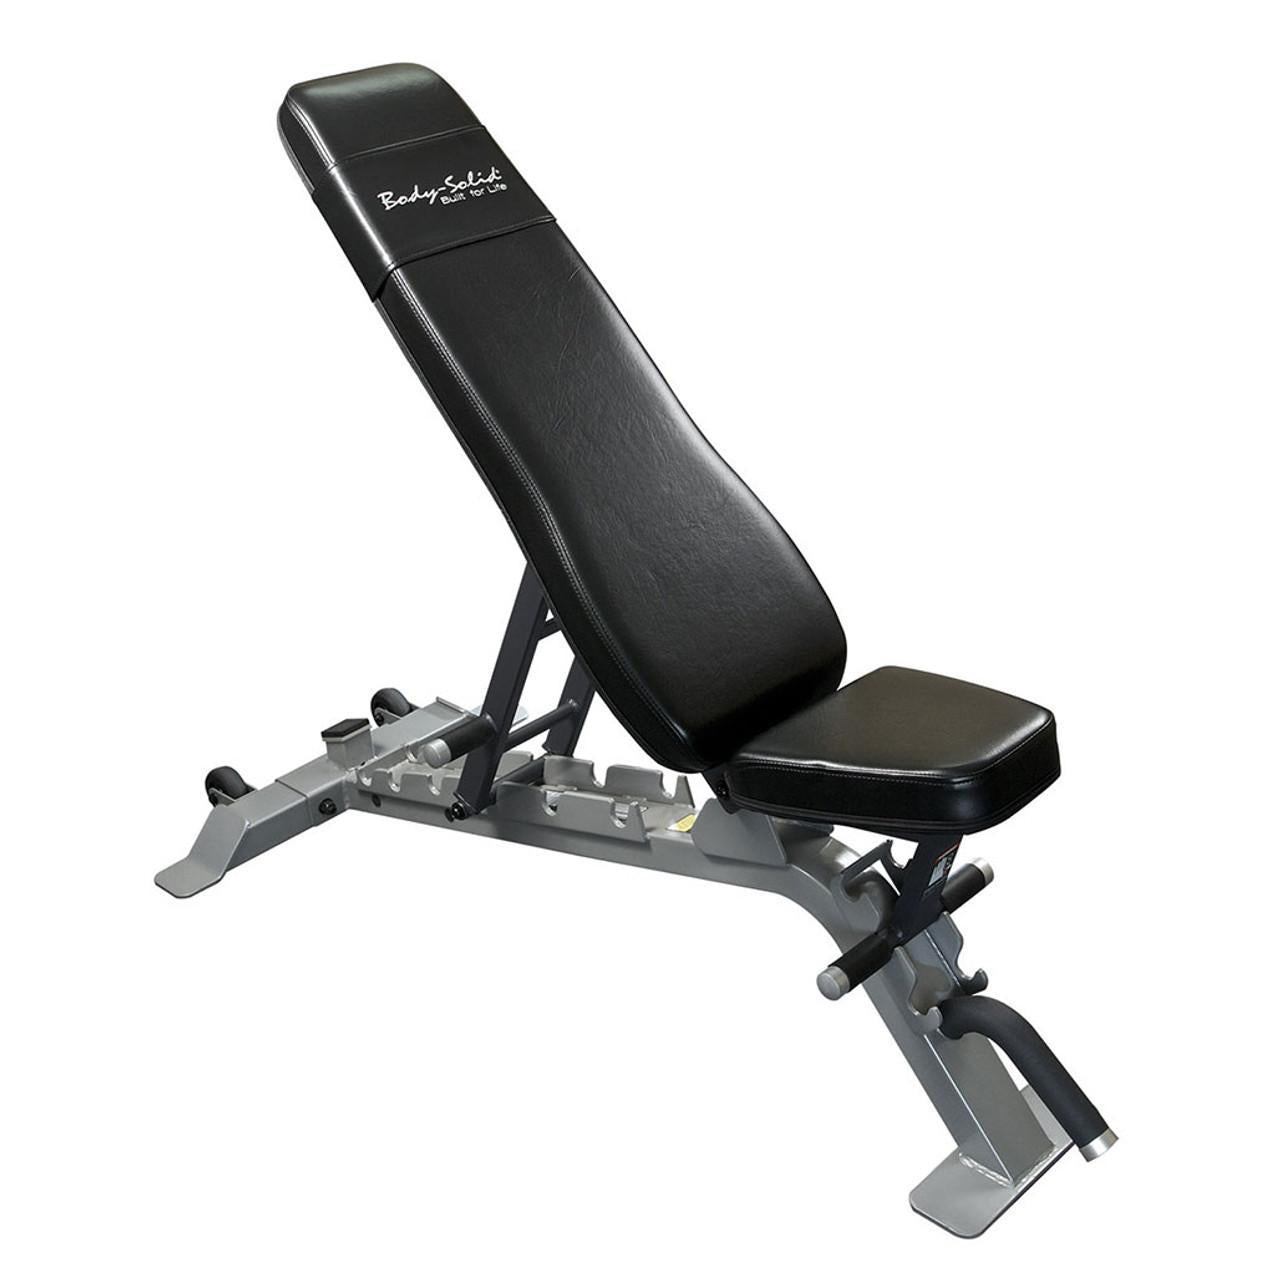 Pro ClubLine SFID325 Adjustable Bench by Body-Solid